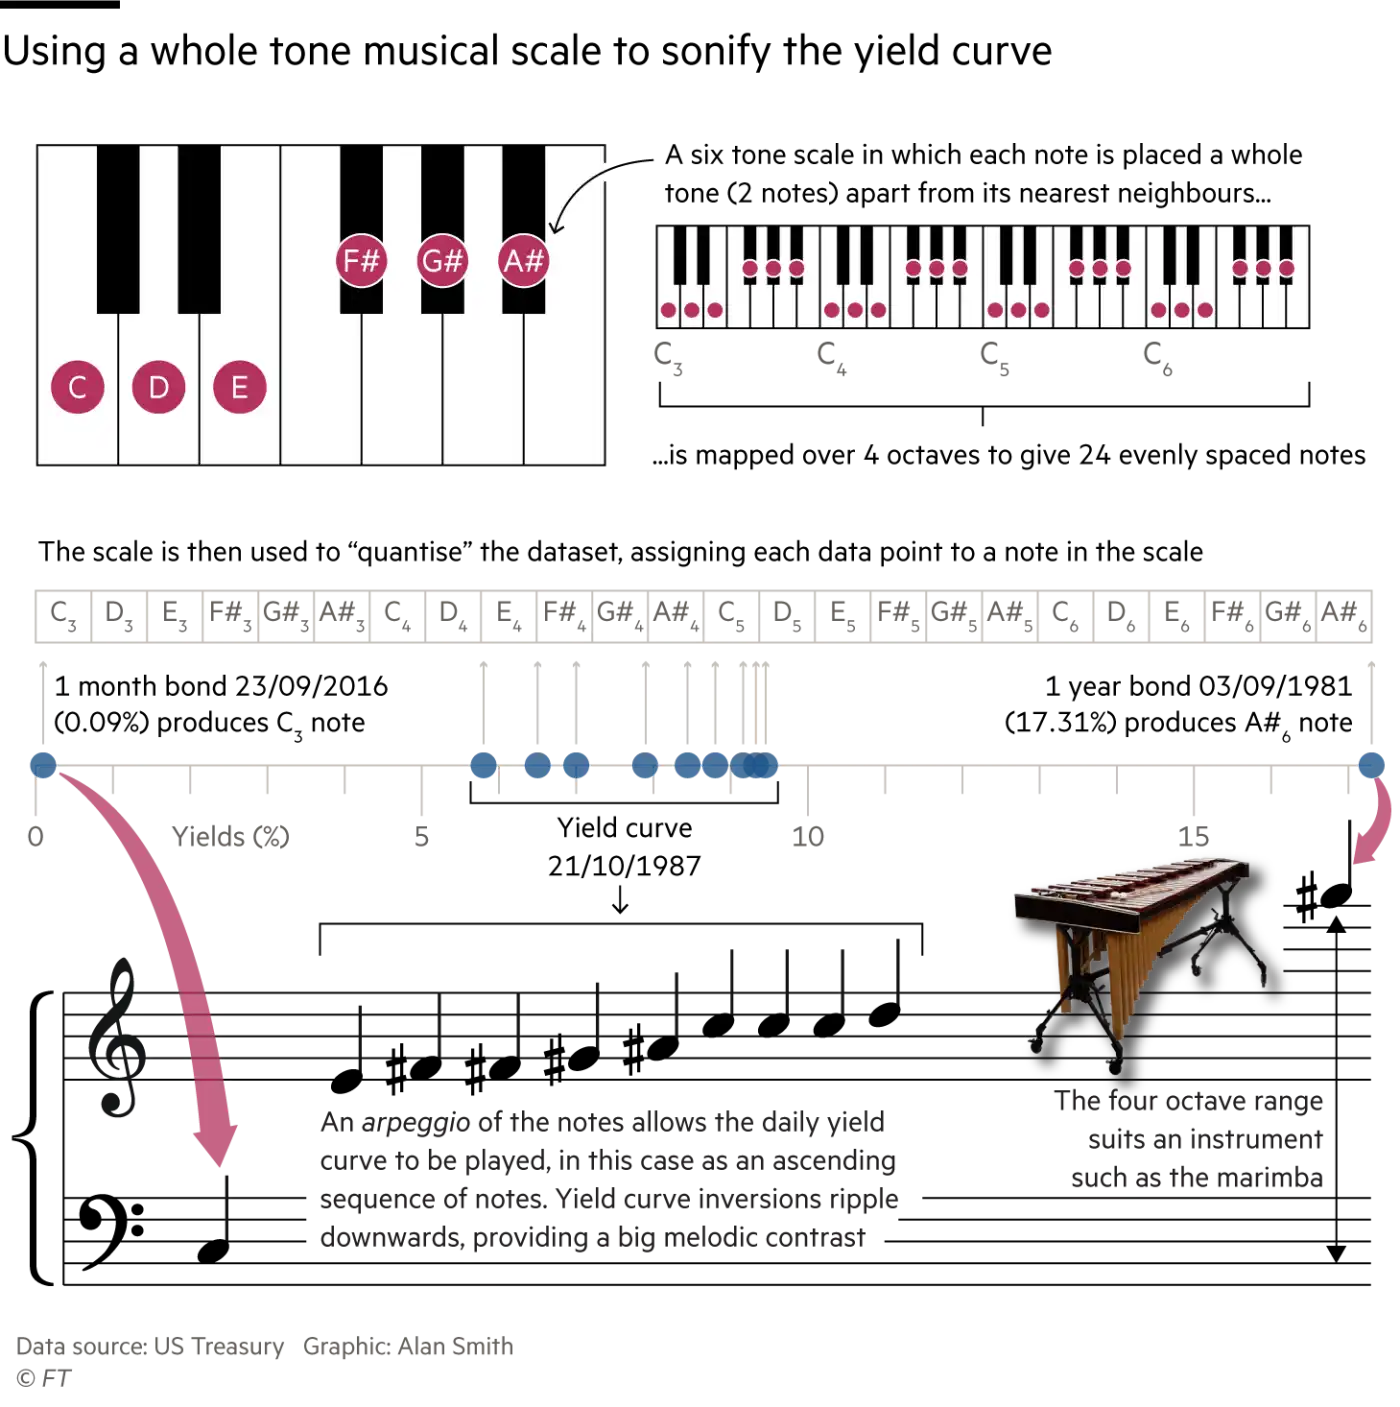 A diagram showing how data is mapped to musical notes with a piano keyboard and musical notes on staves